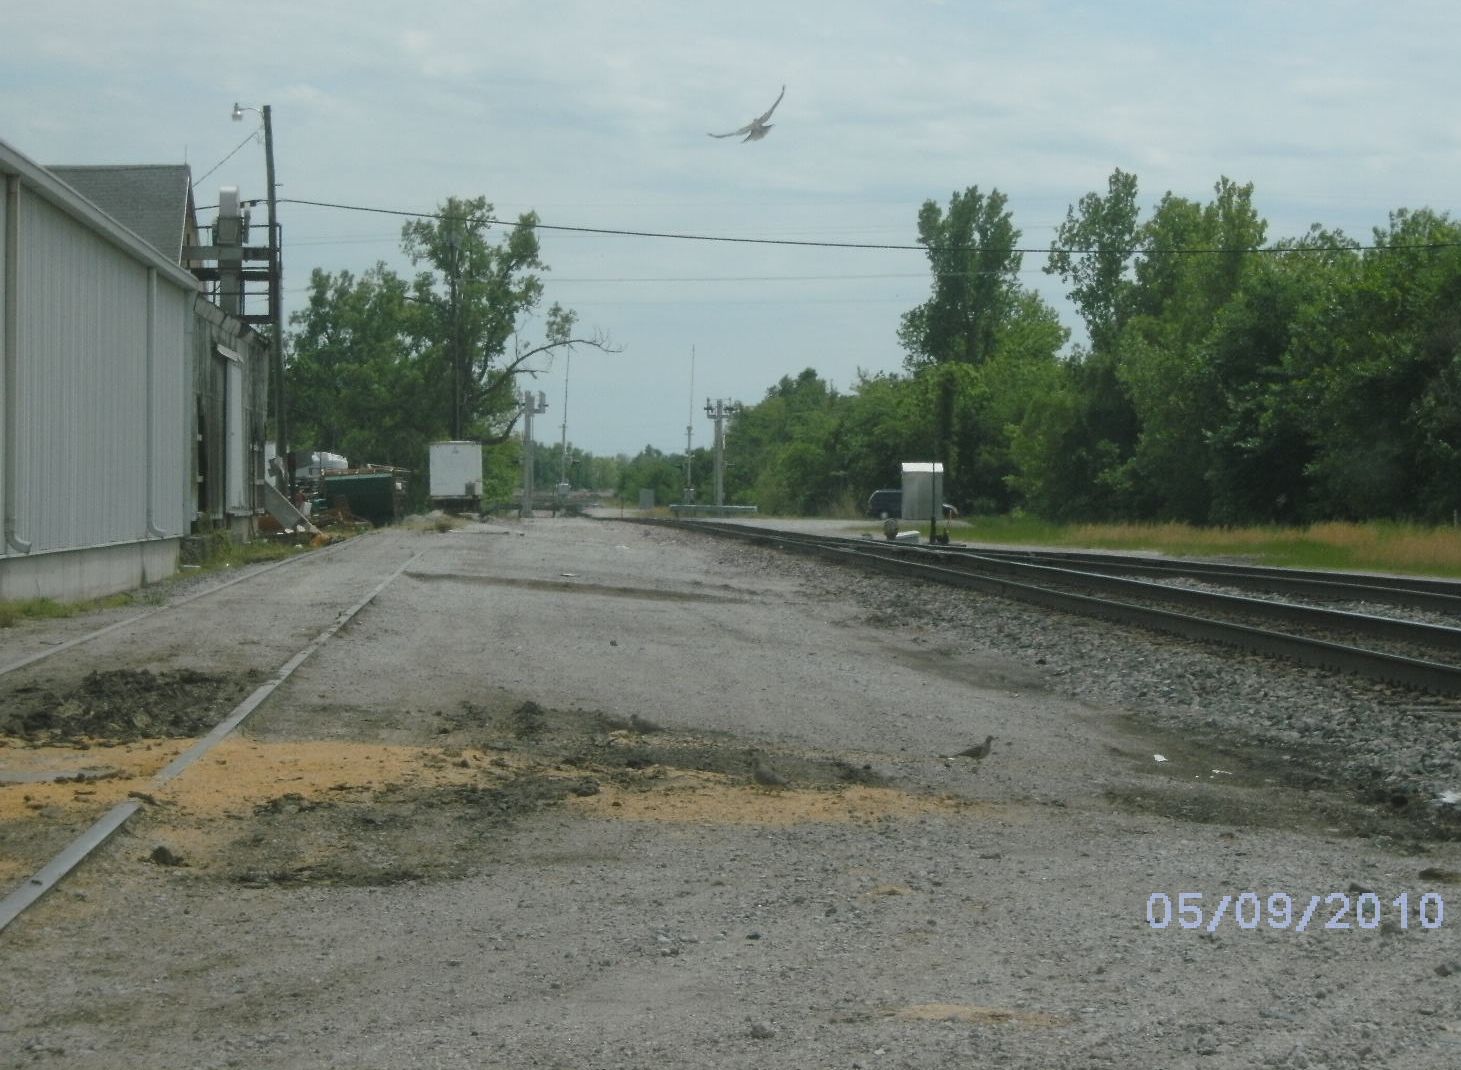 Baxter Springs yards, southern view